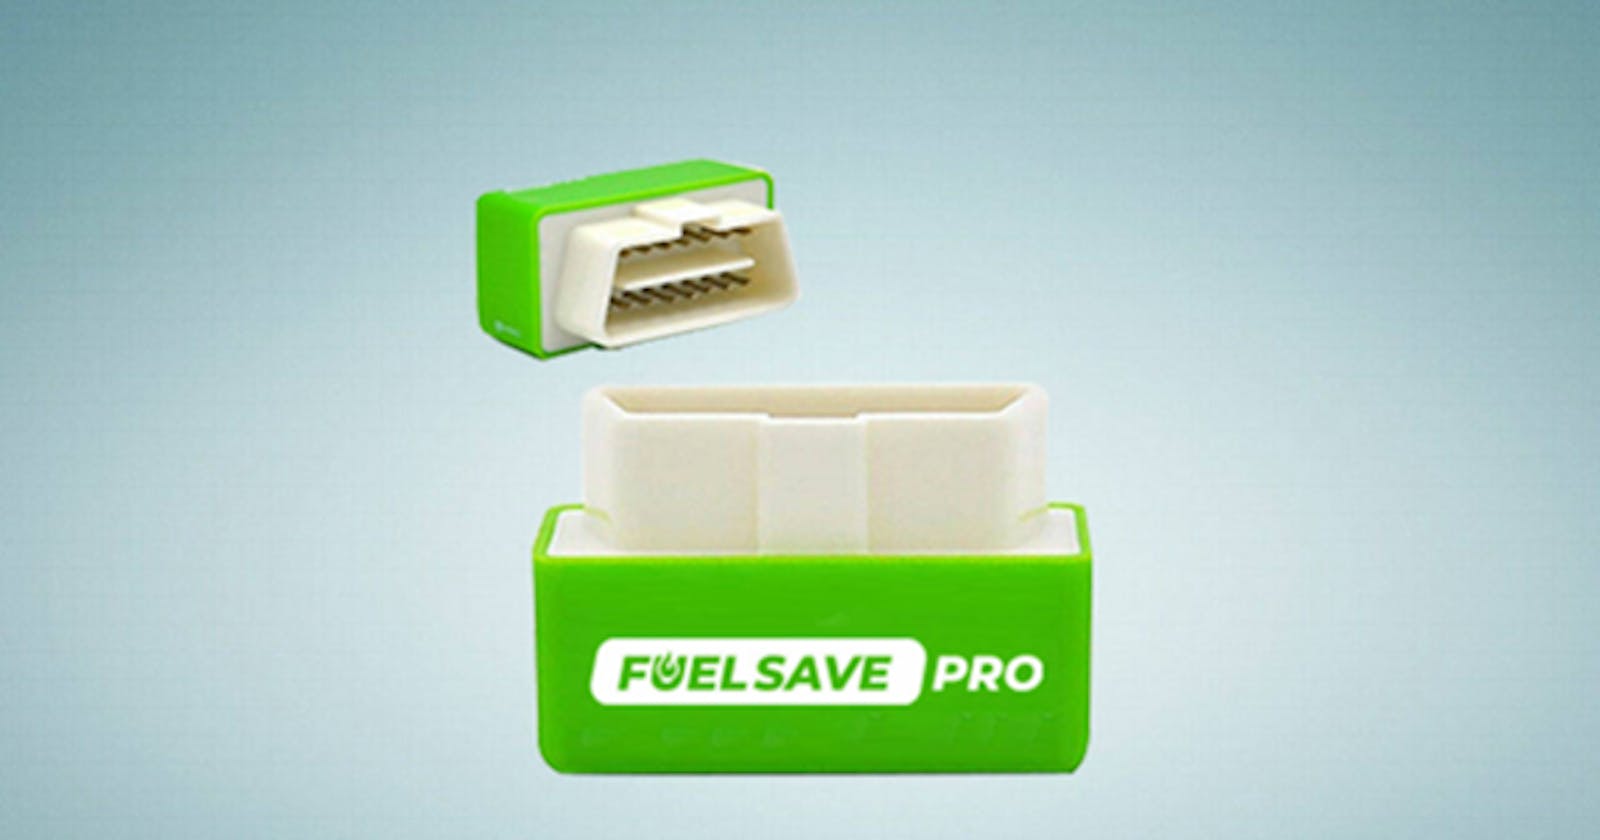 Fuel Save Pro - Benefits, Price, Reviews, Results, Scam Or Legit?